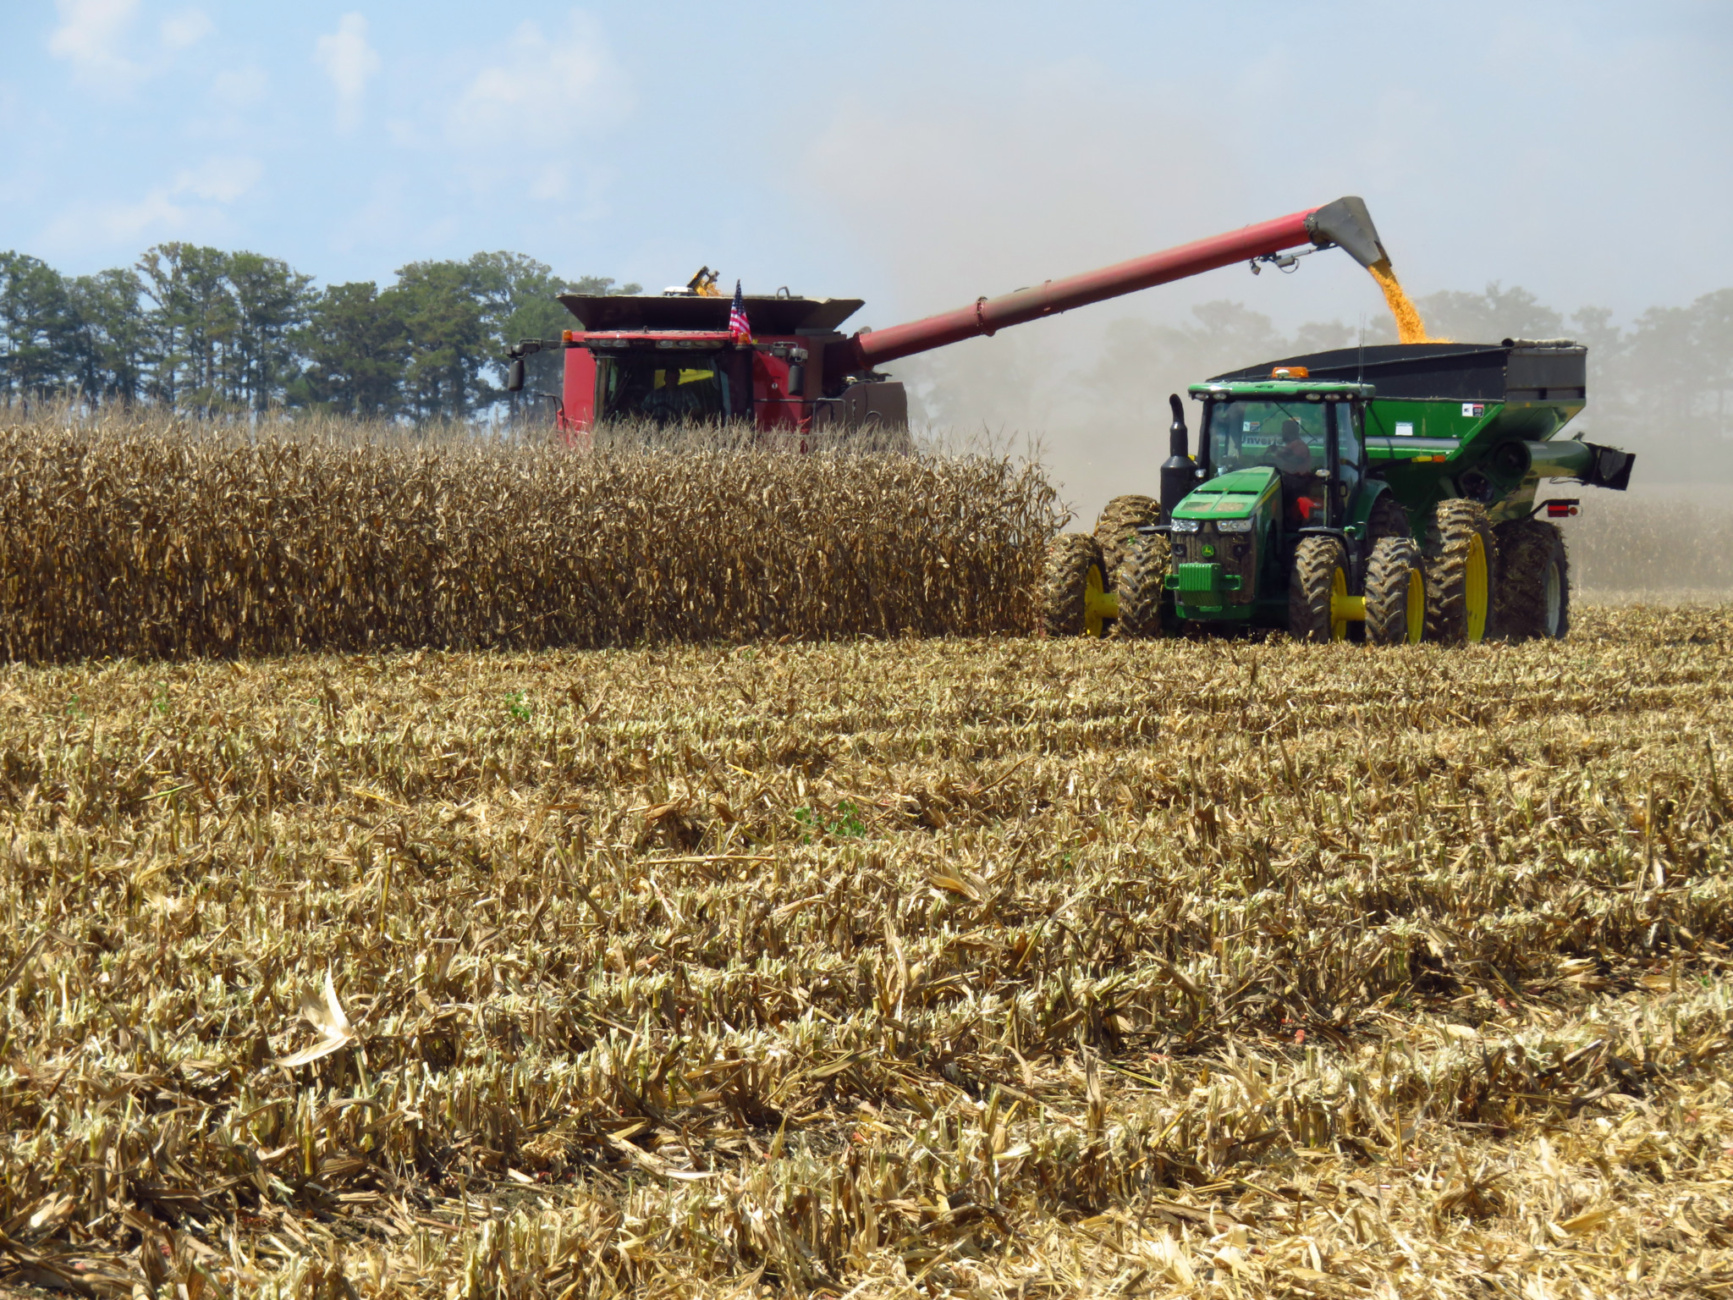 Most Crops Mature As Farmers Shift Into Harvest Mode In Latest USDA Crop Progress Report